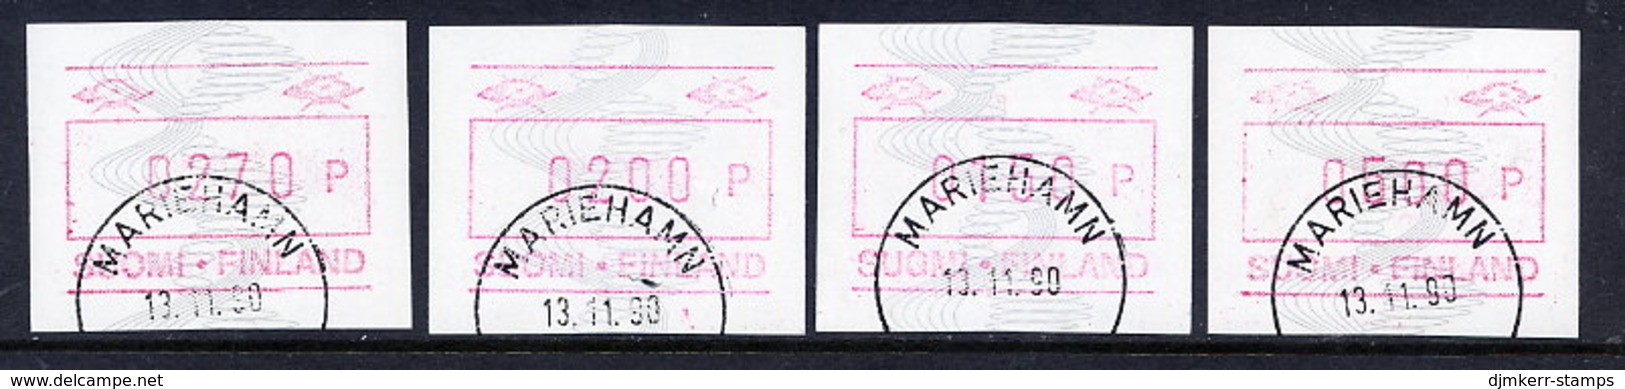 FINLAND 1990 Definitive Without ATM Number , 4 Different Values Used.  Michel 7 - Automaatzegels [ATM]